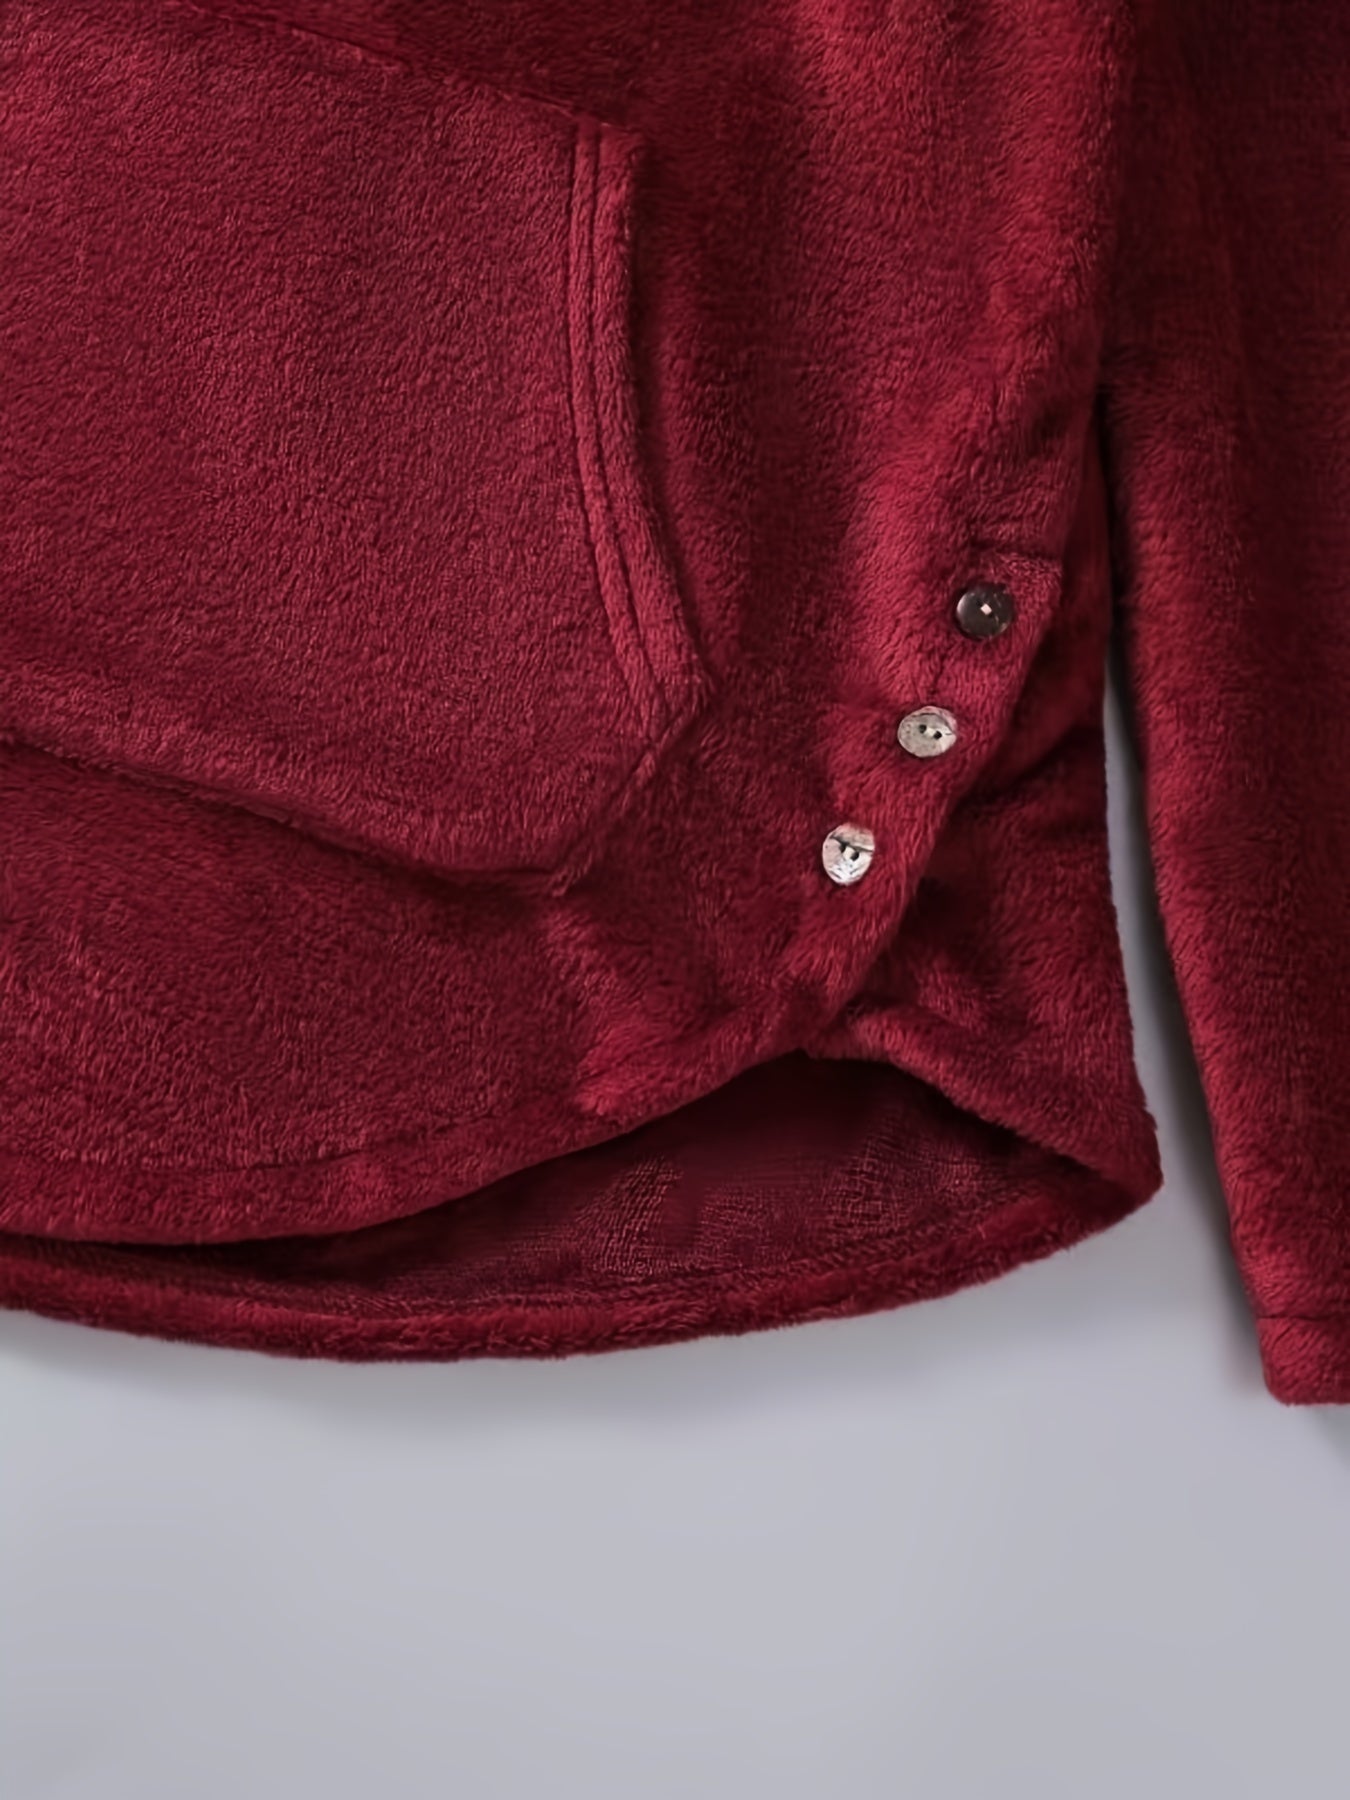 Close-up of a maroon, plush fabric top with a pocket and four buttons on the side, resembling cozy comfortable winter wear. The texture appears soft and fuzzy. This is the Graphic Print Fluffy Loose Cat Ears Hoodie, Casual Hooded Pocket Fashion Long Sleeve Sweatshirt from Maramalive™.